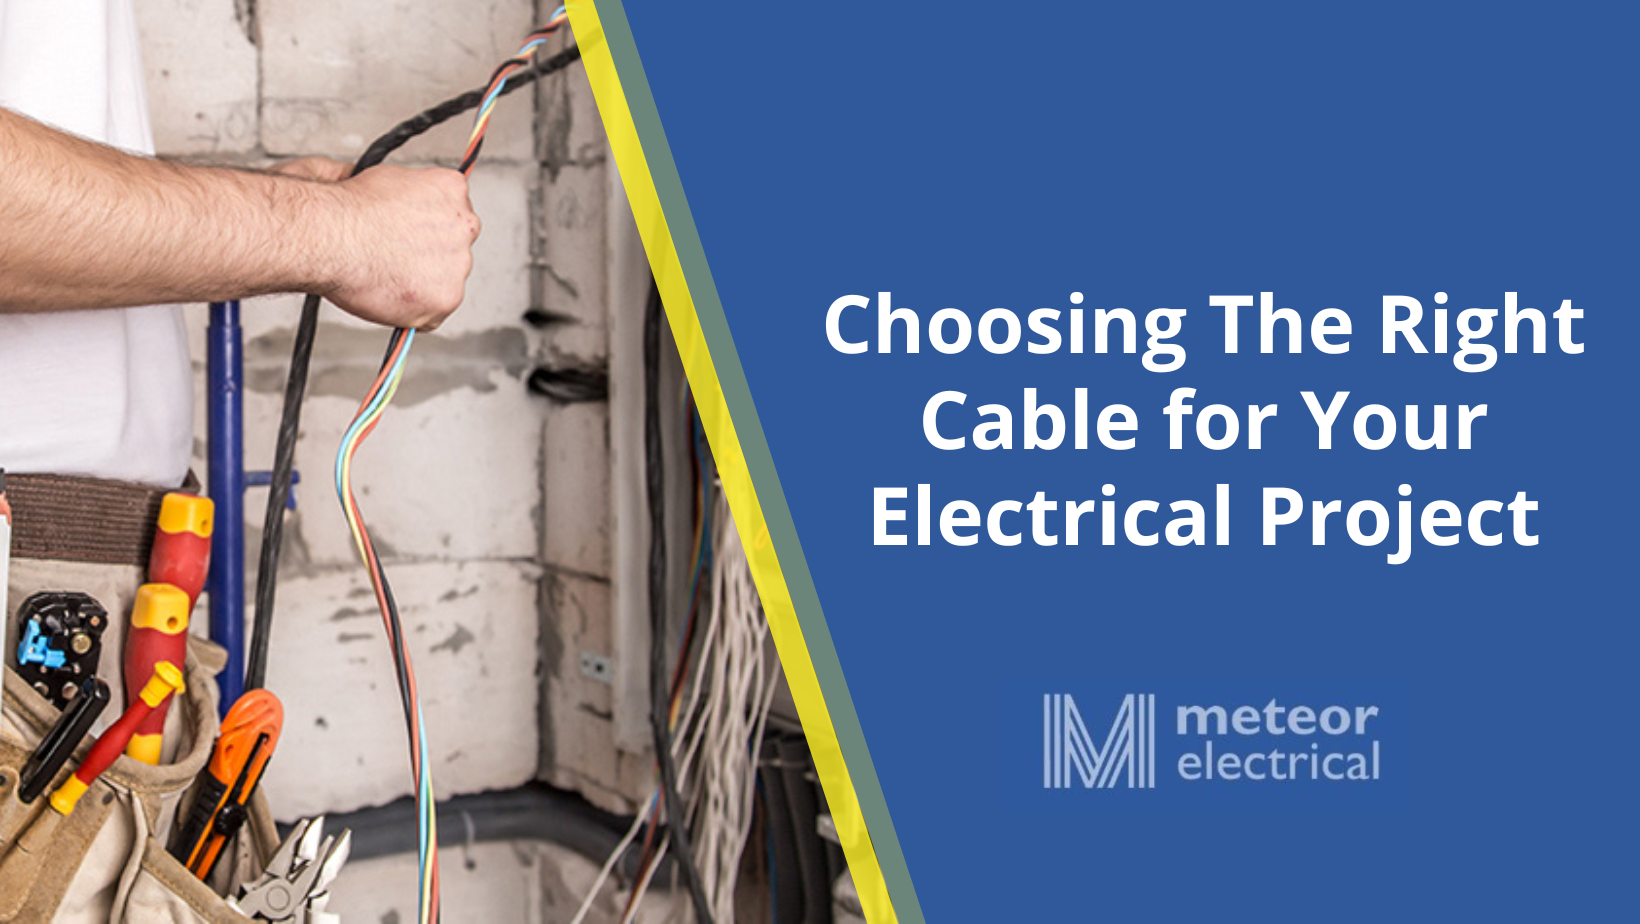 Choosing The Right Cable for Your Electrical Project